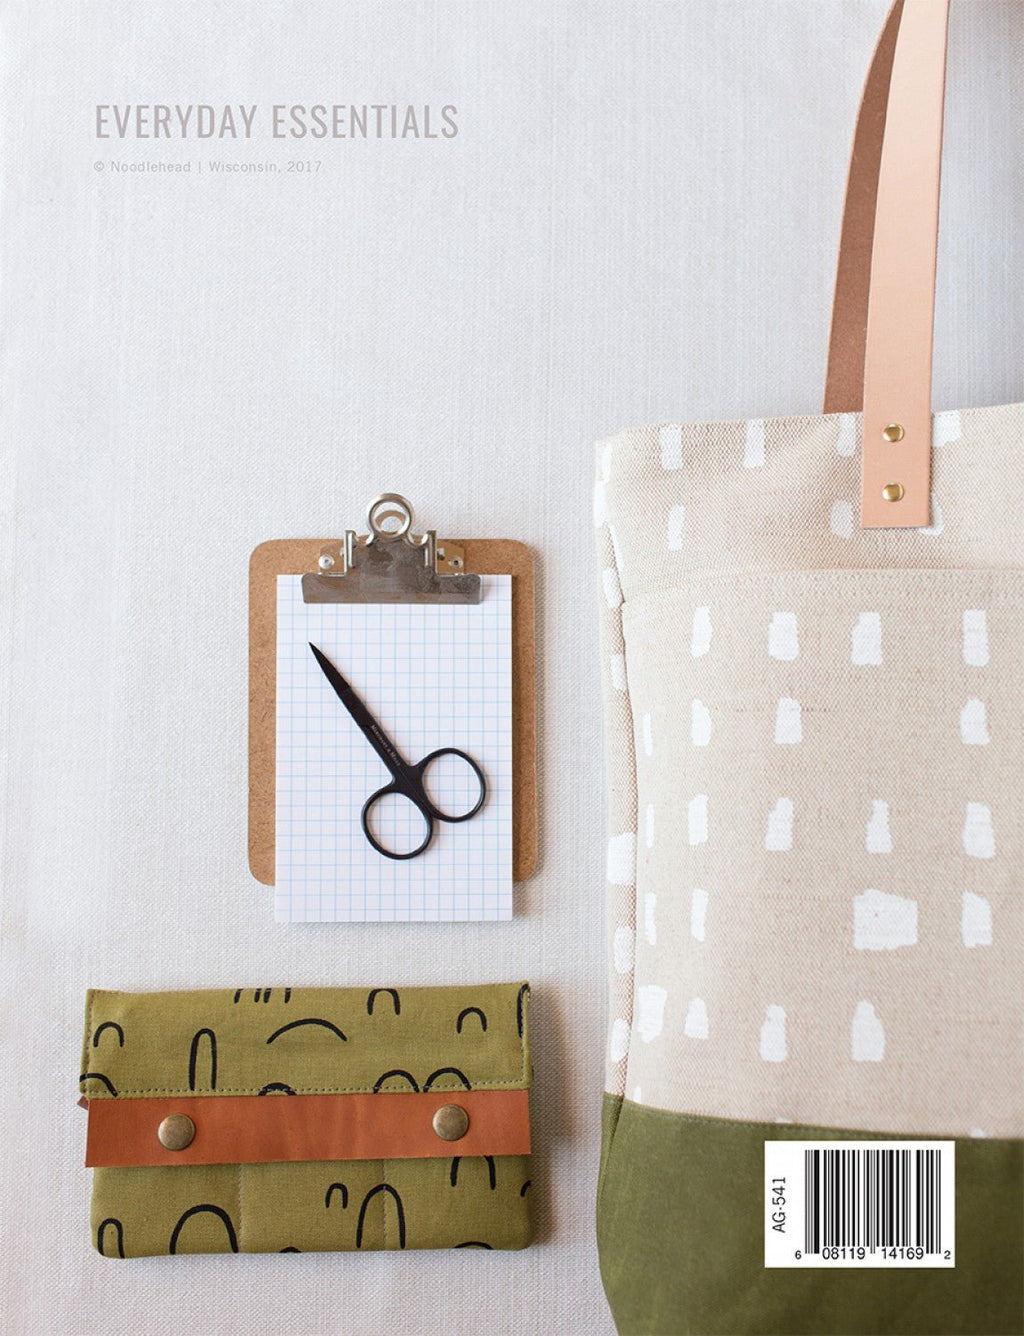 Everyday Essentials (3 patterns!) by Noodlehead (Printed Booklet